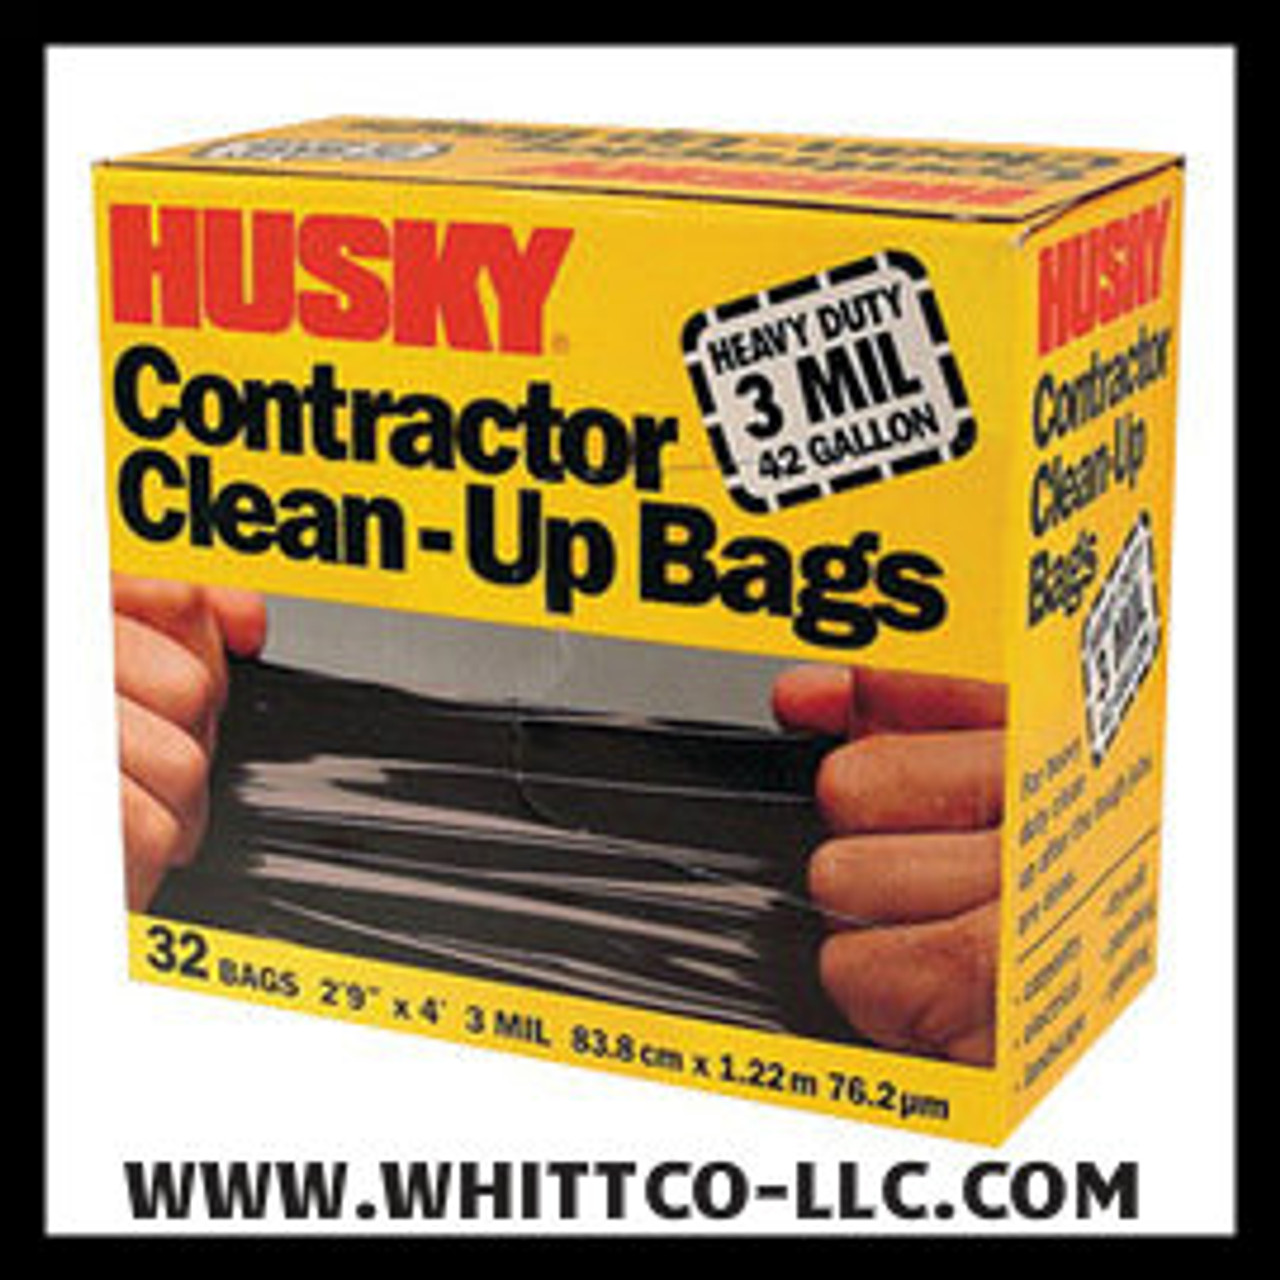 https://cdn11.bigcommerce.com/s-tfh34o/images/stencil/1280x1280/products/61016/112693/Husky_contractor_bags_hk42wc032B_WHITTCO_Industrial_Supplies__00368.1659023558.jpg?c=2